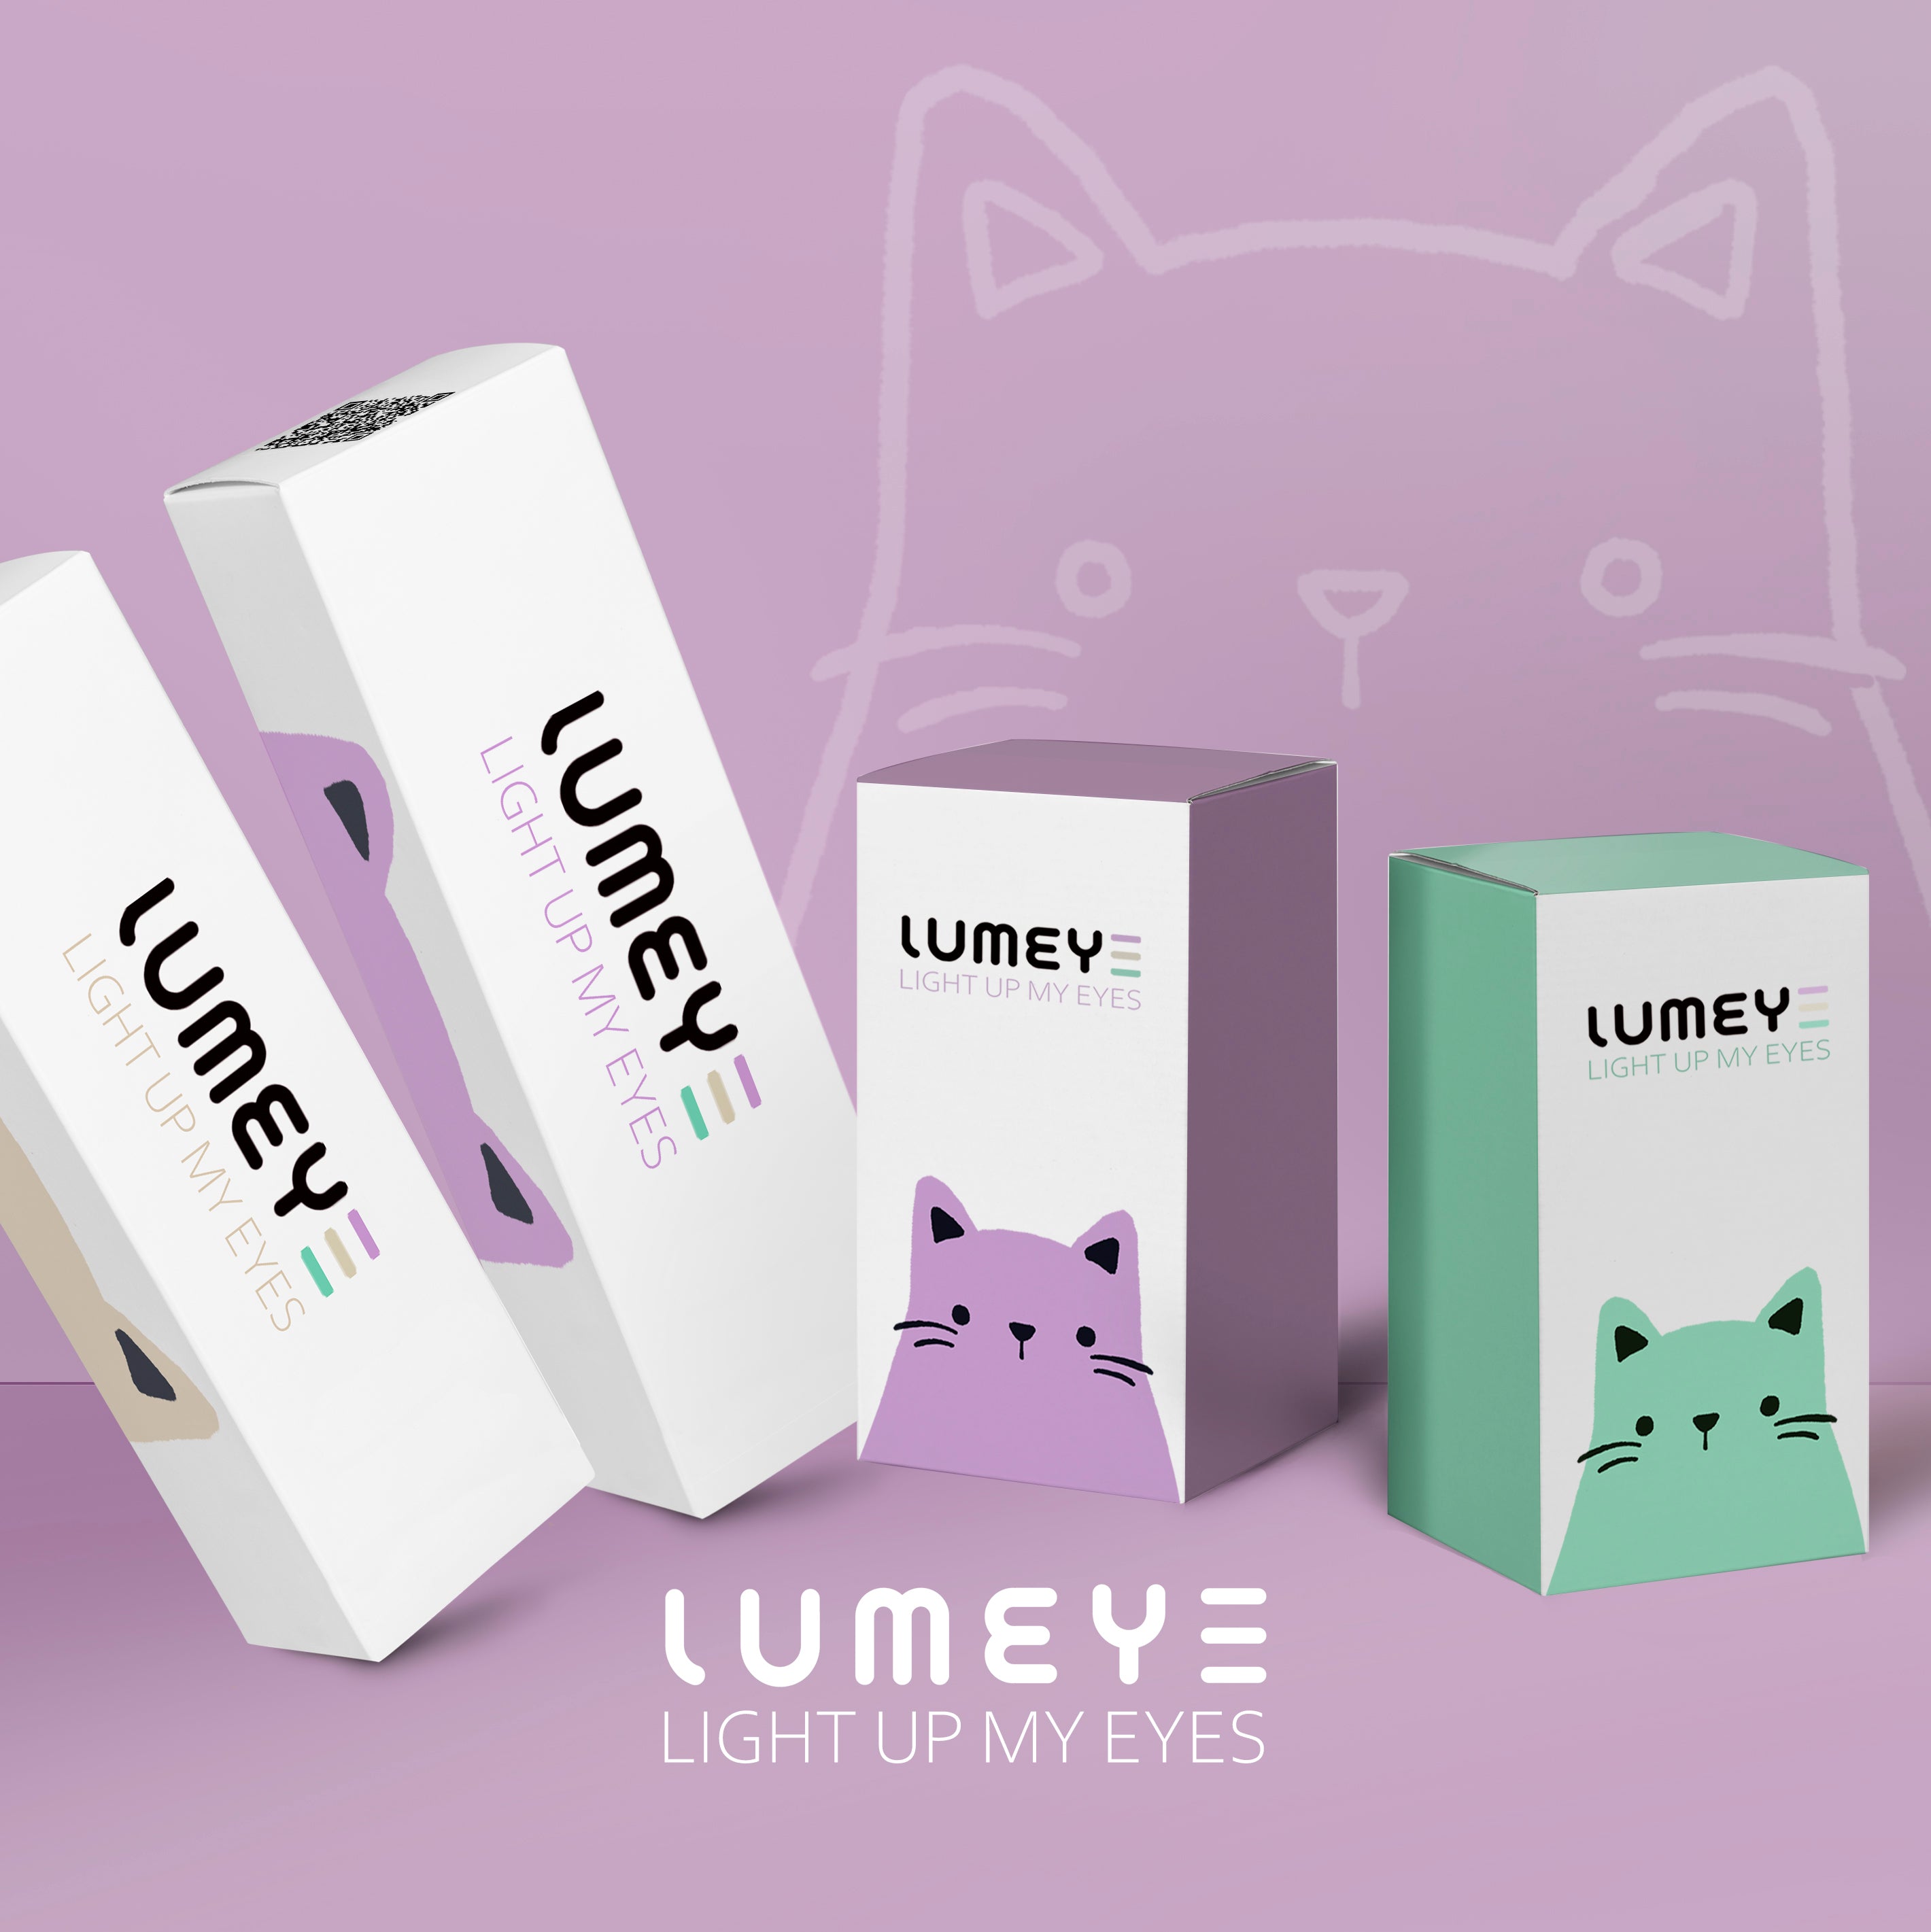 Best COLORED CONTACTS - LUMEYE Mystery Blue Colored Contact Lenses - LUMEYE